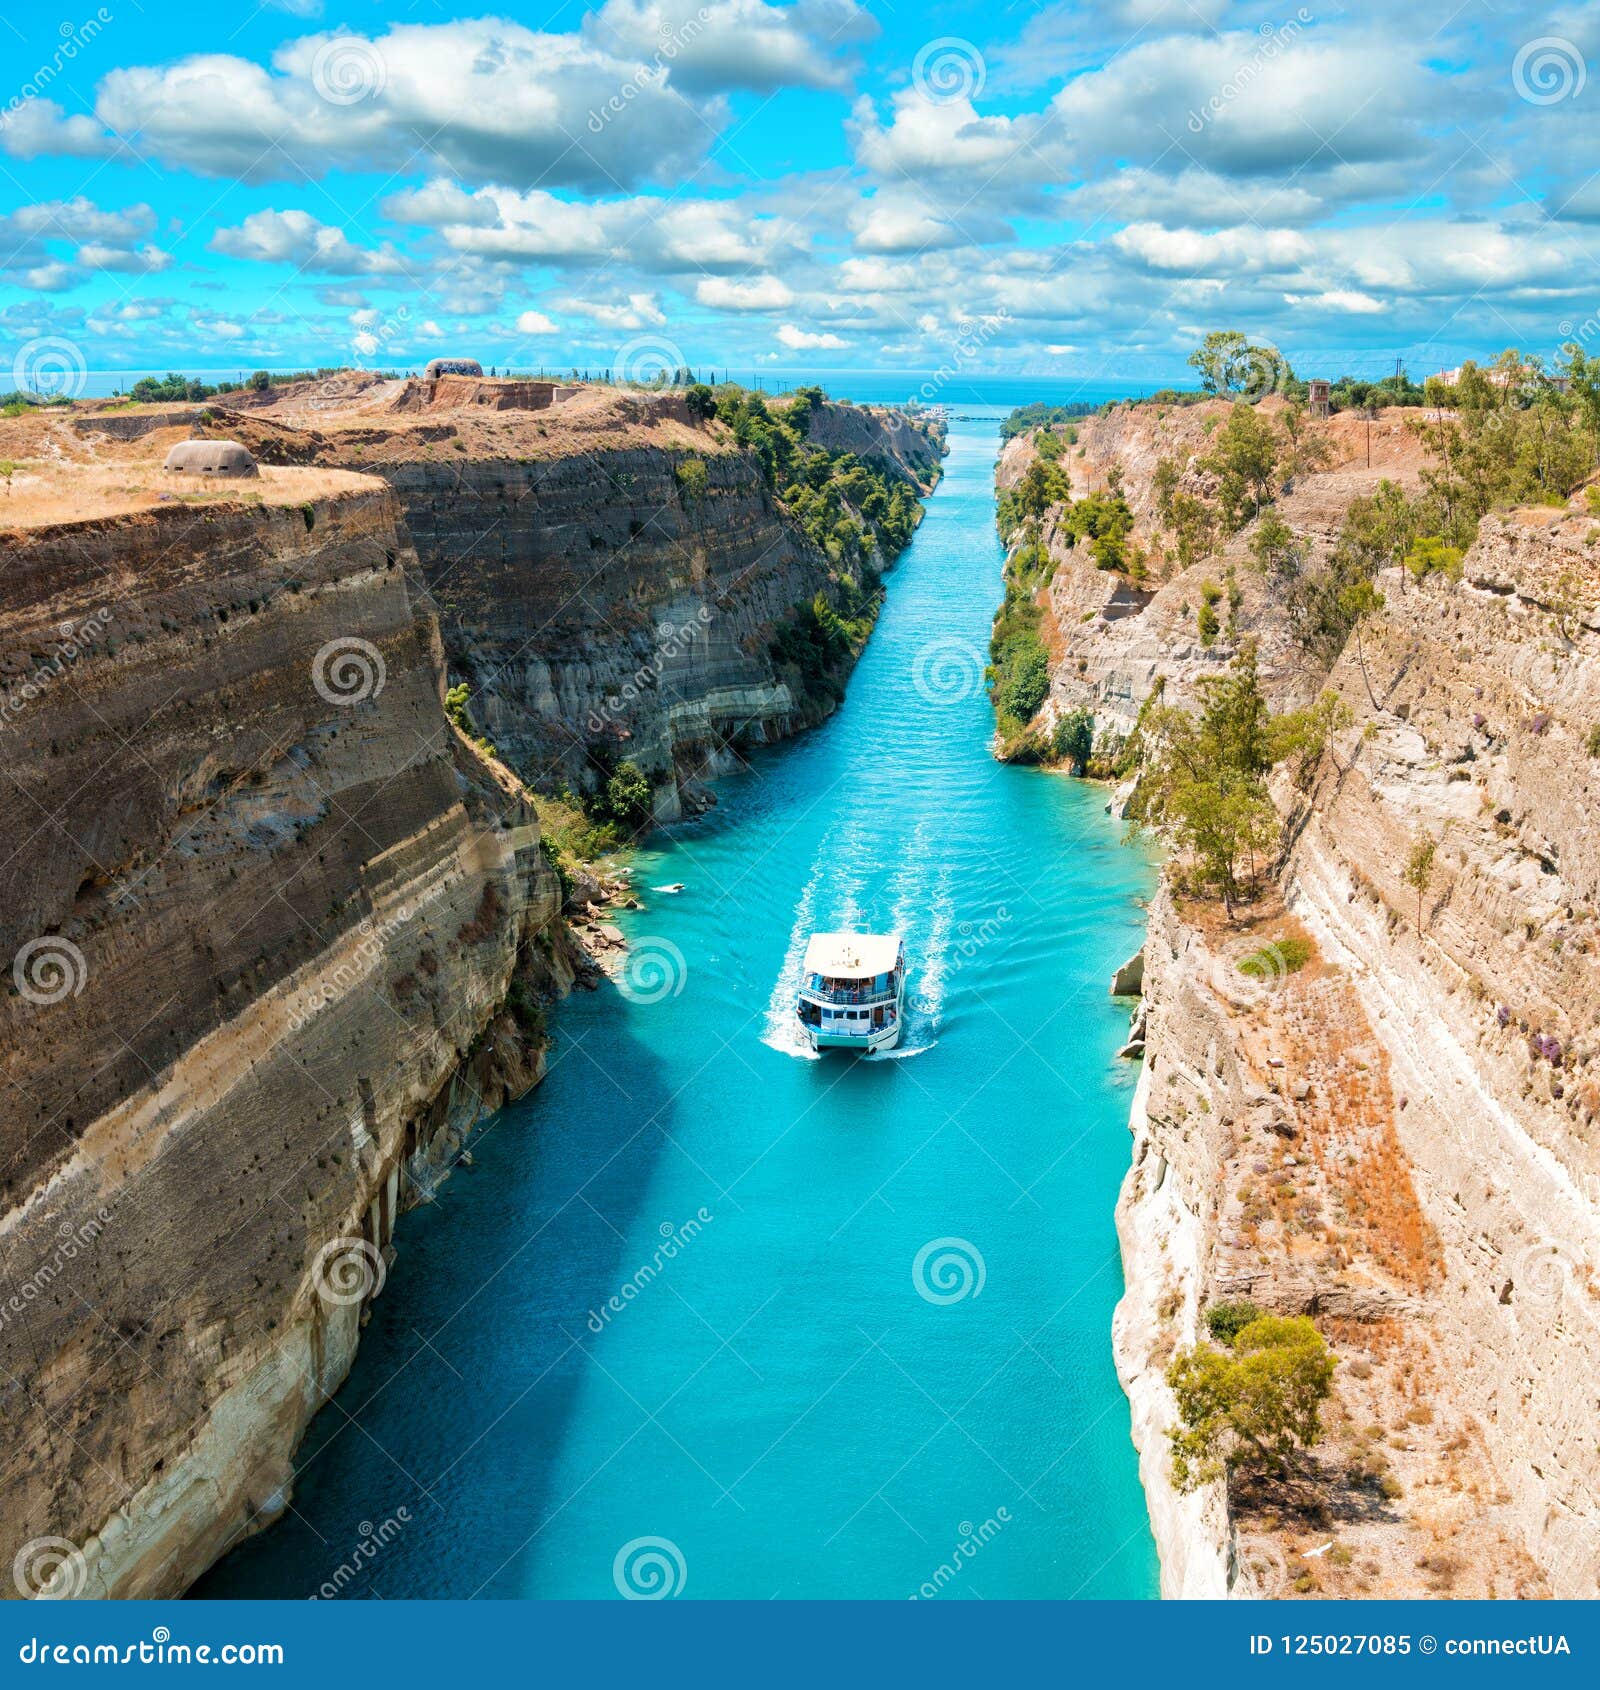 beautiful scenery of the corinth canal